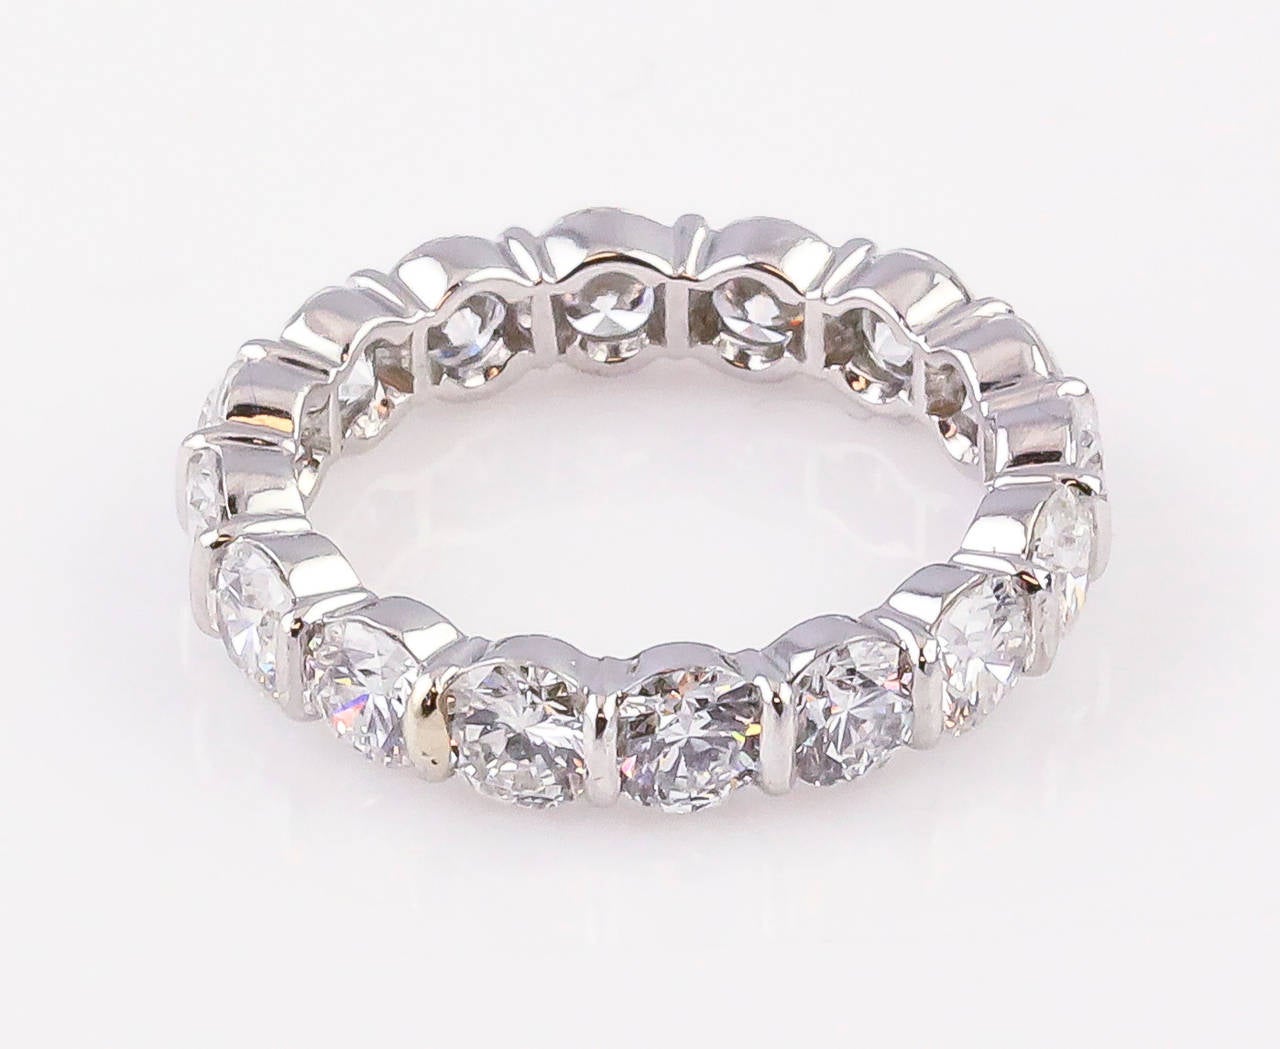 Chic diamond and platinum band by Tiffany & Co. It features a shared setting, with very high grade round brilliant cut diamonds, approx. 3.5cts total weight. Size 5.5. Approx. 4mm wide.

Hallmarks: T & Co., PT950.